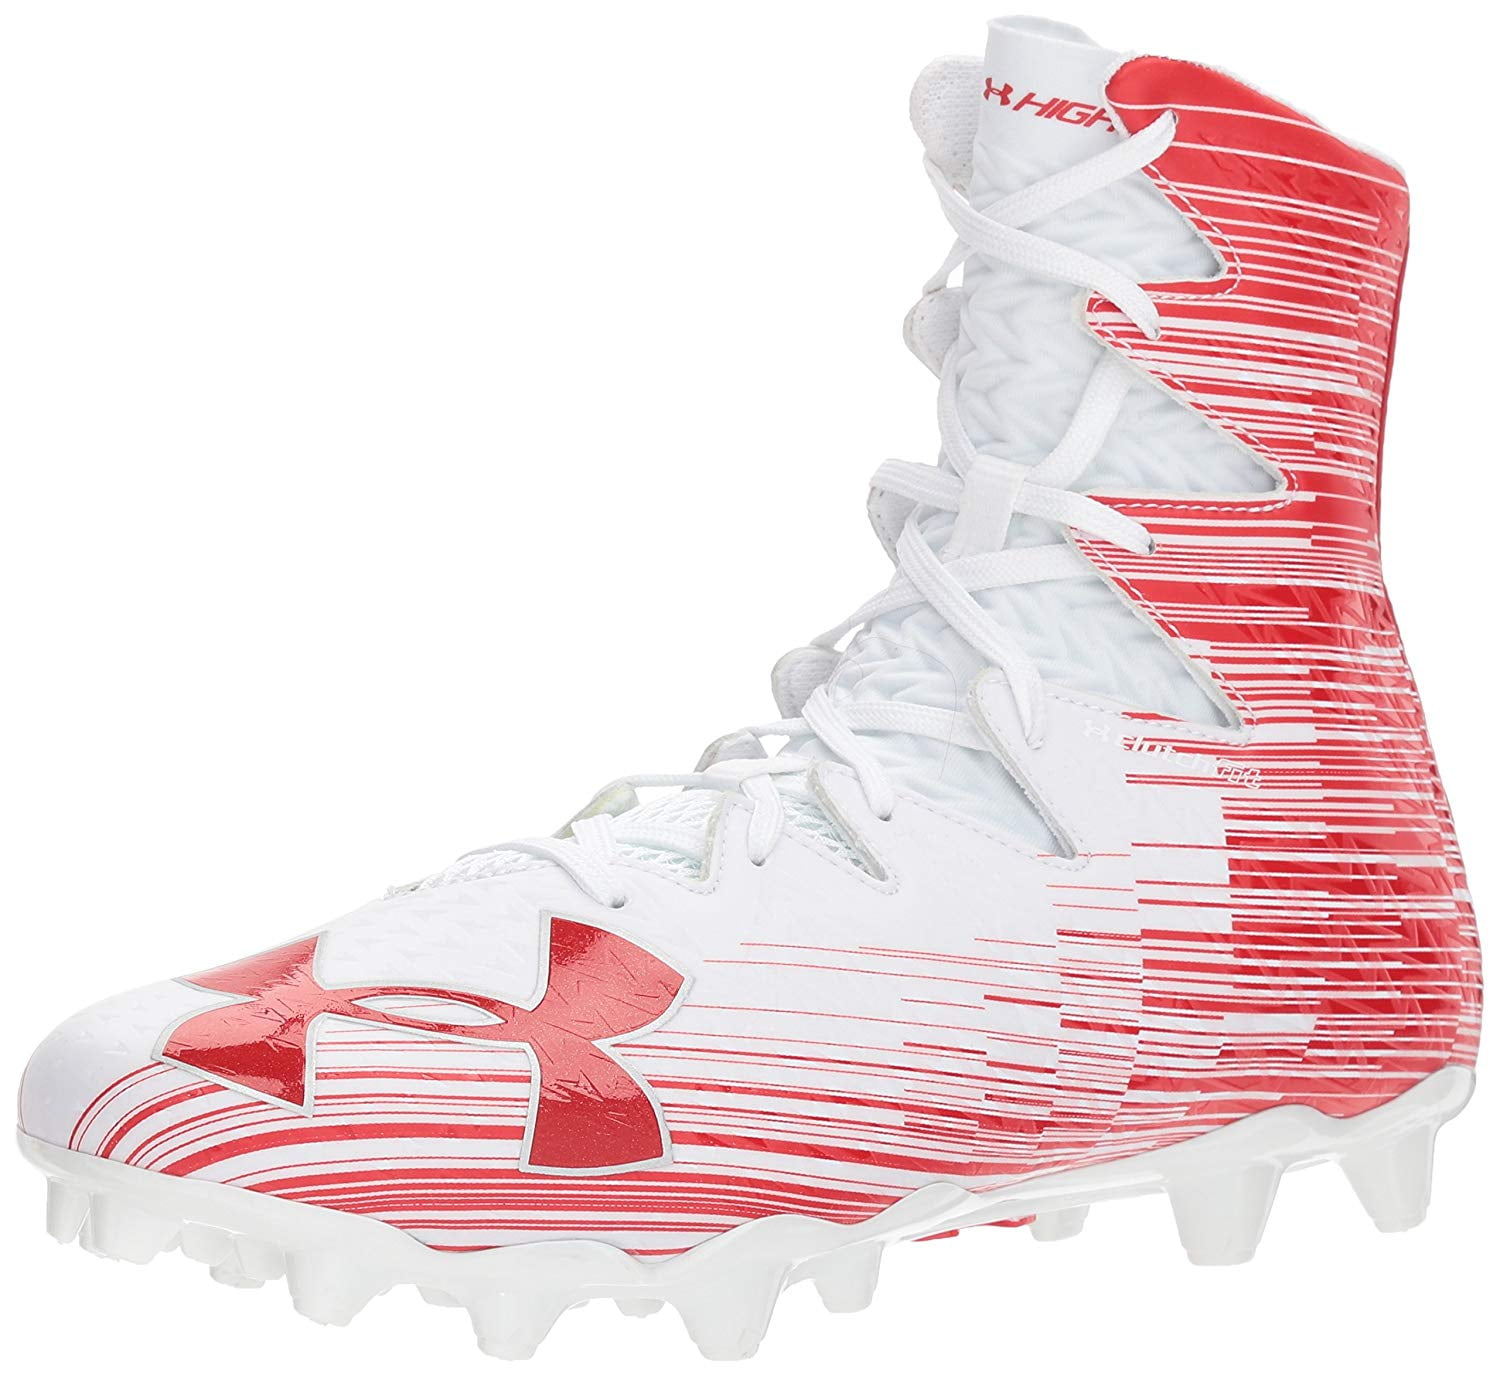 Under Armour Cleat Size Chart